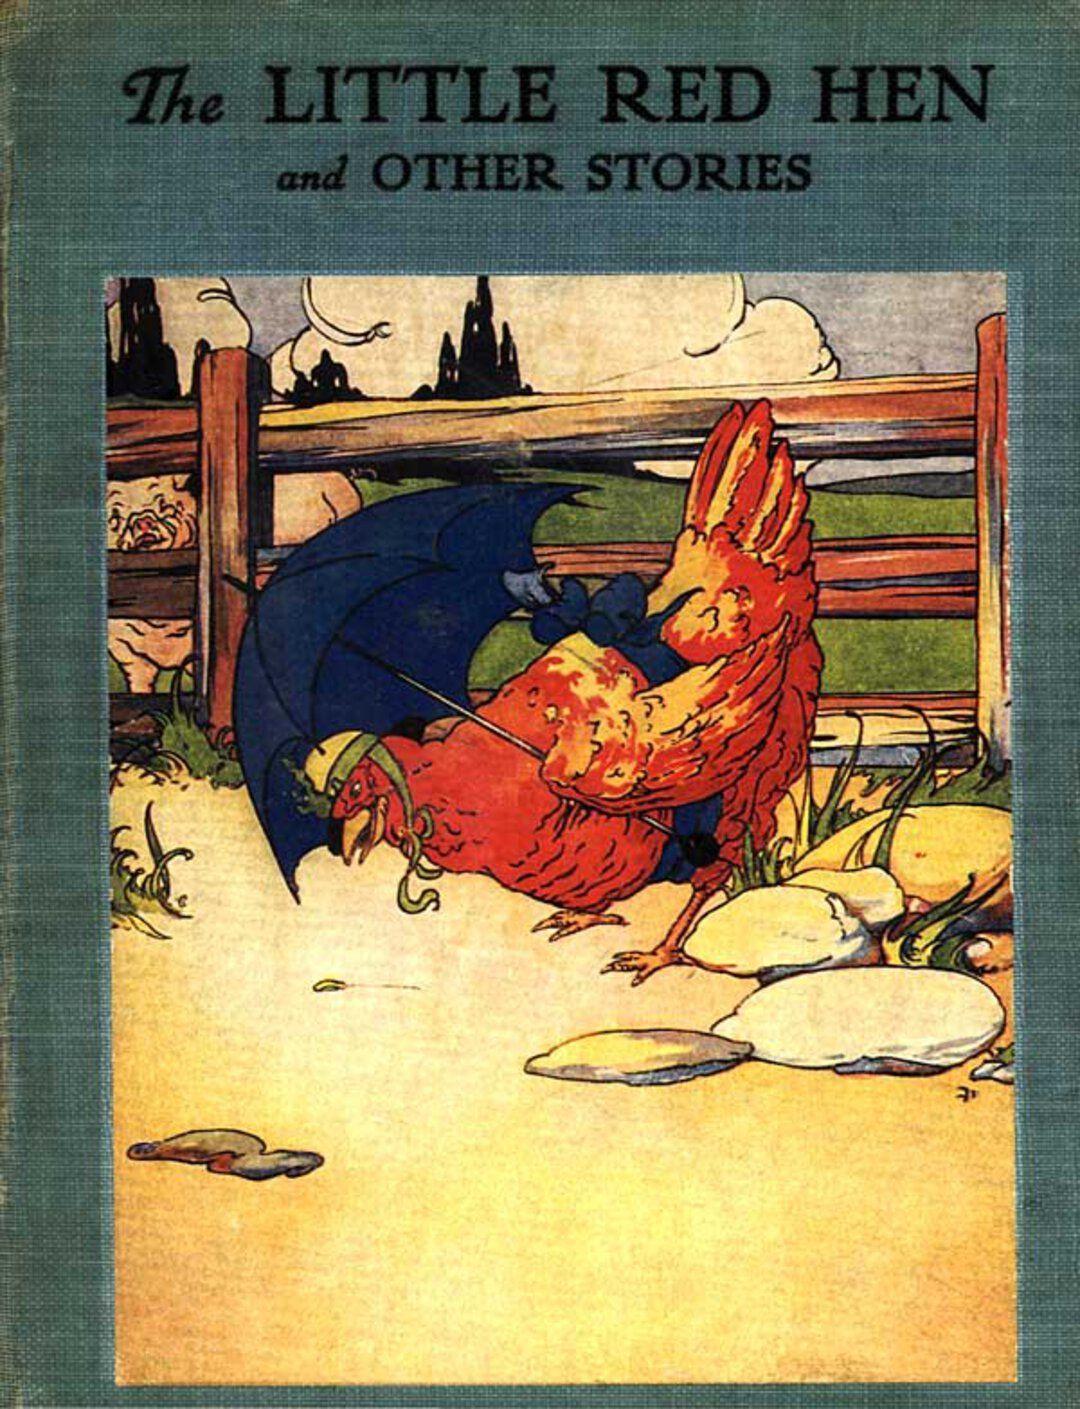 The Little Red Hen #1 image number 0